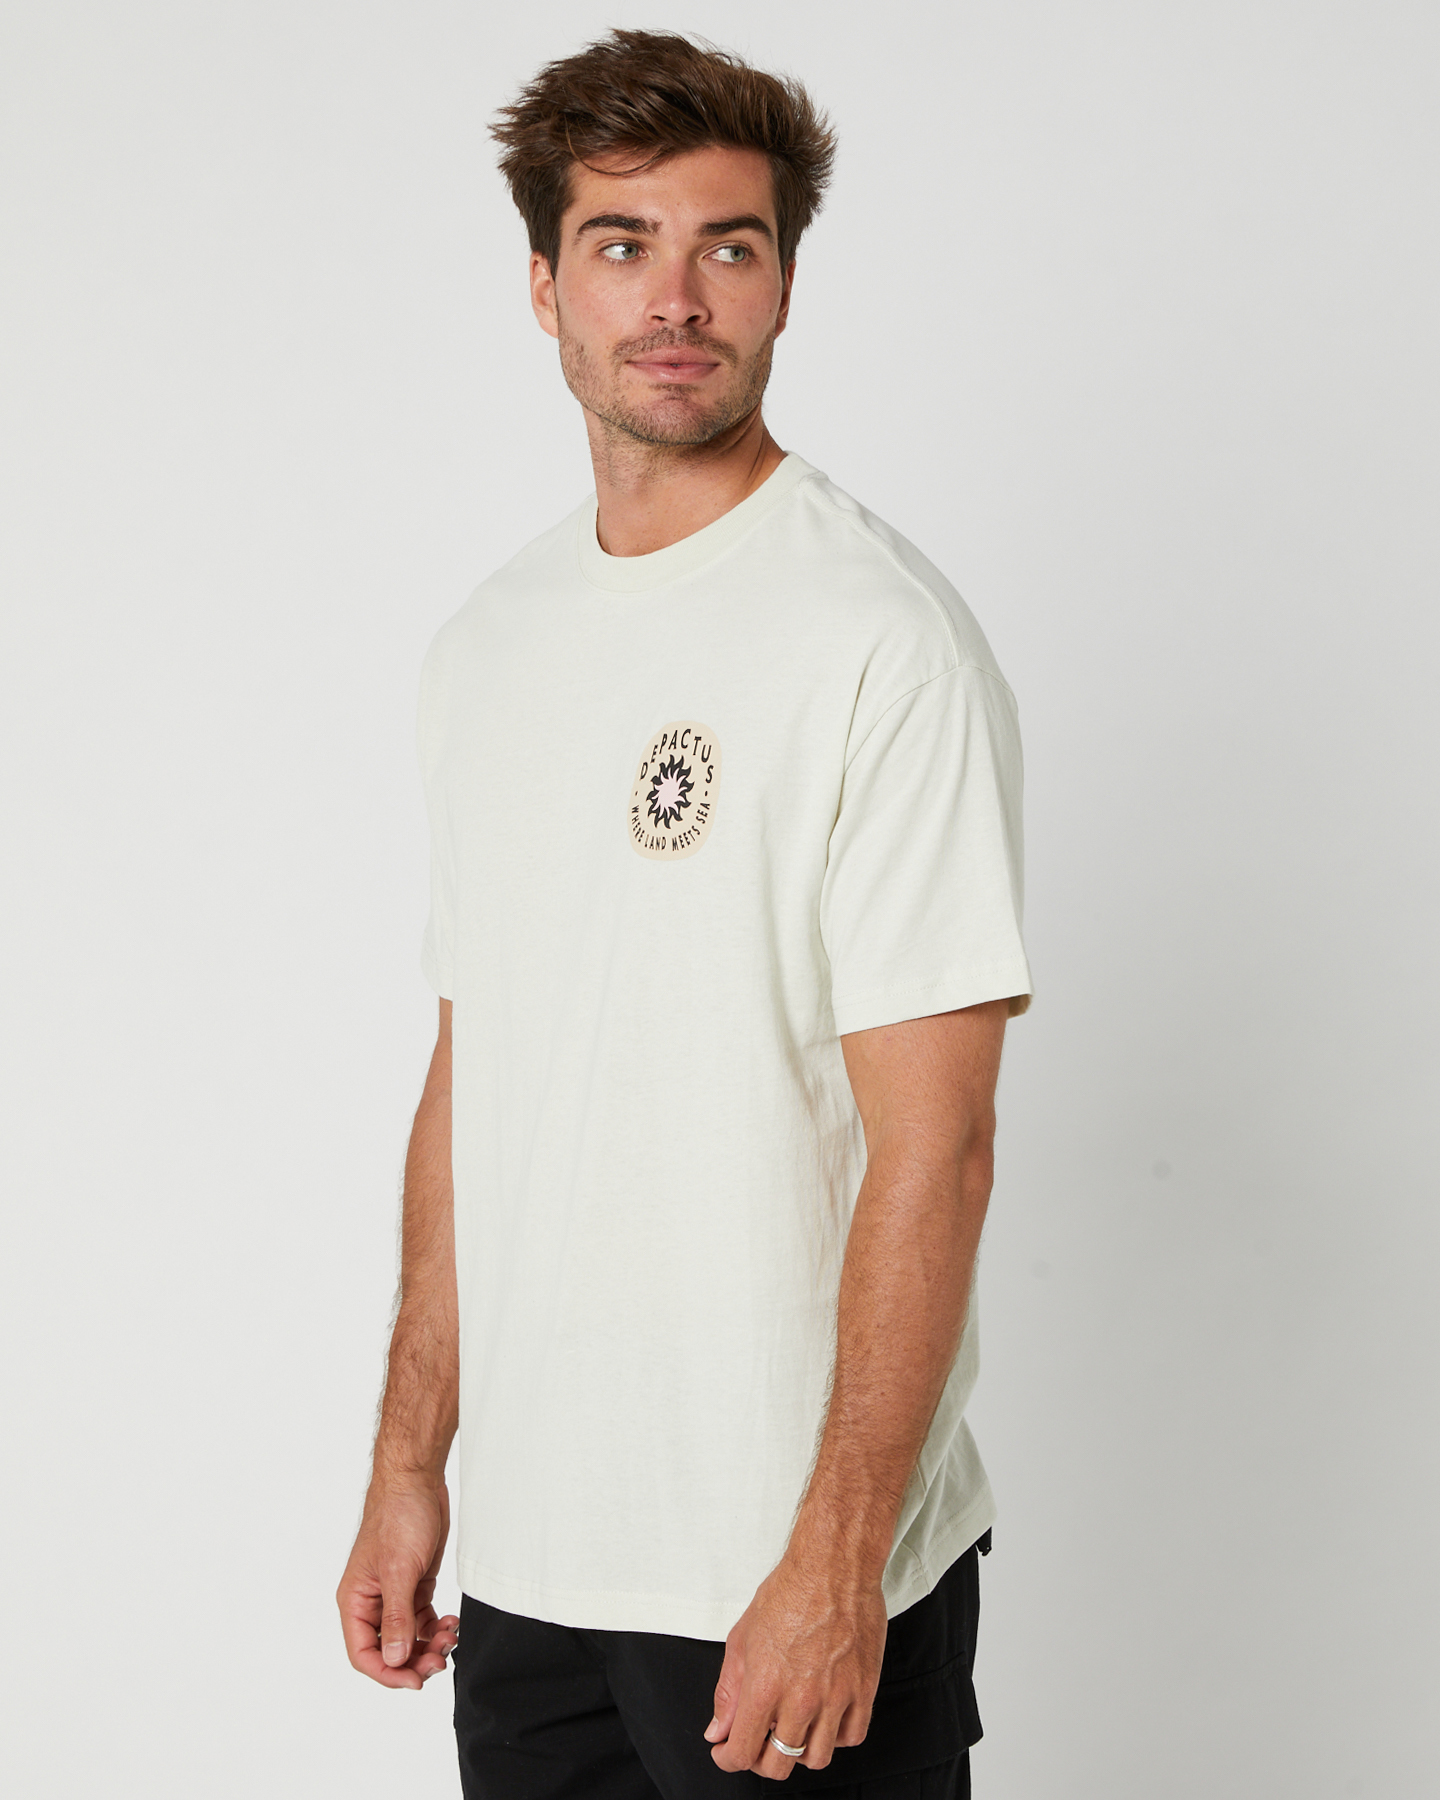 Depactus Flare Tee - Natural | SurfStitch